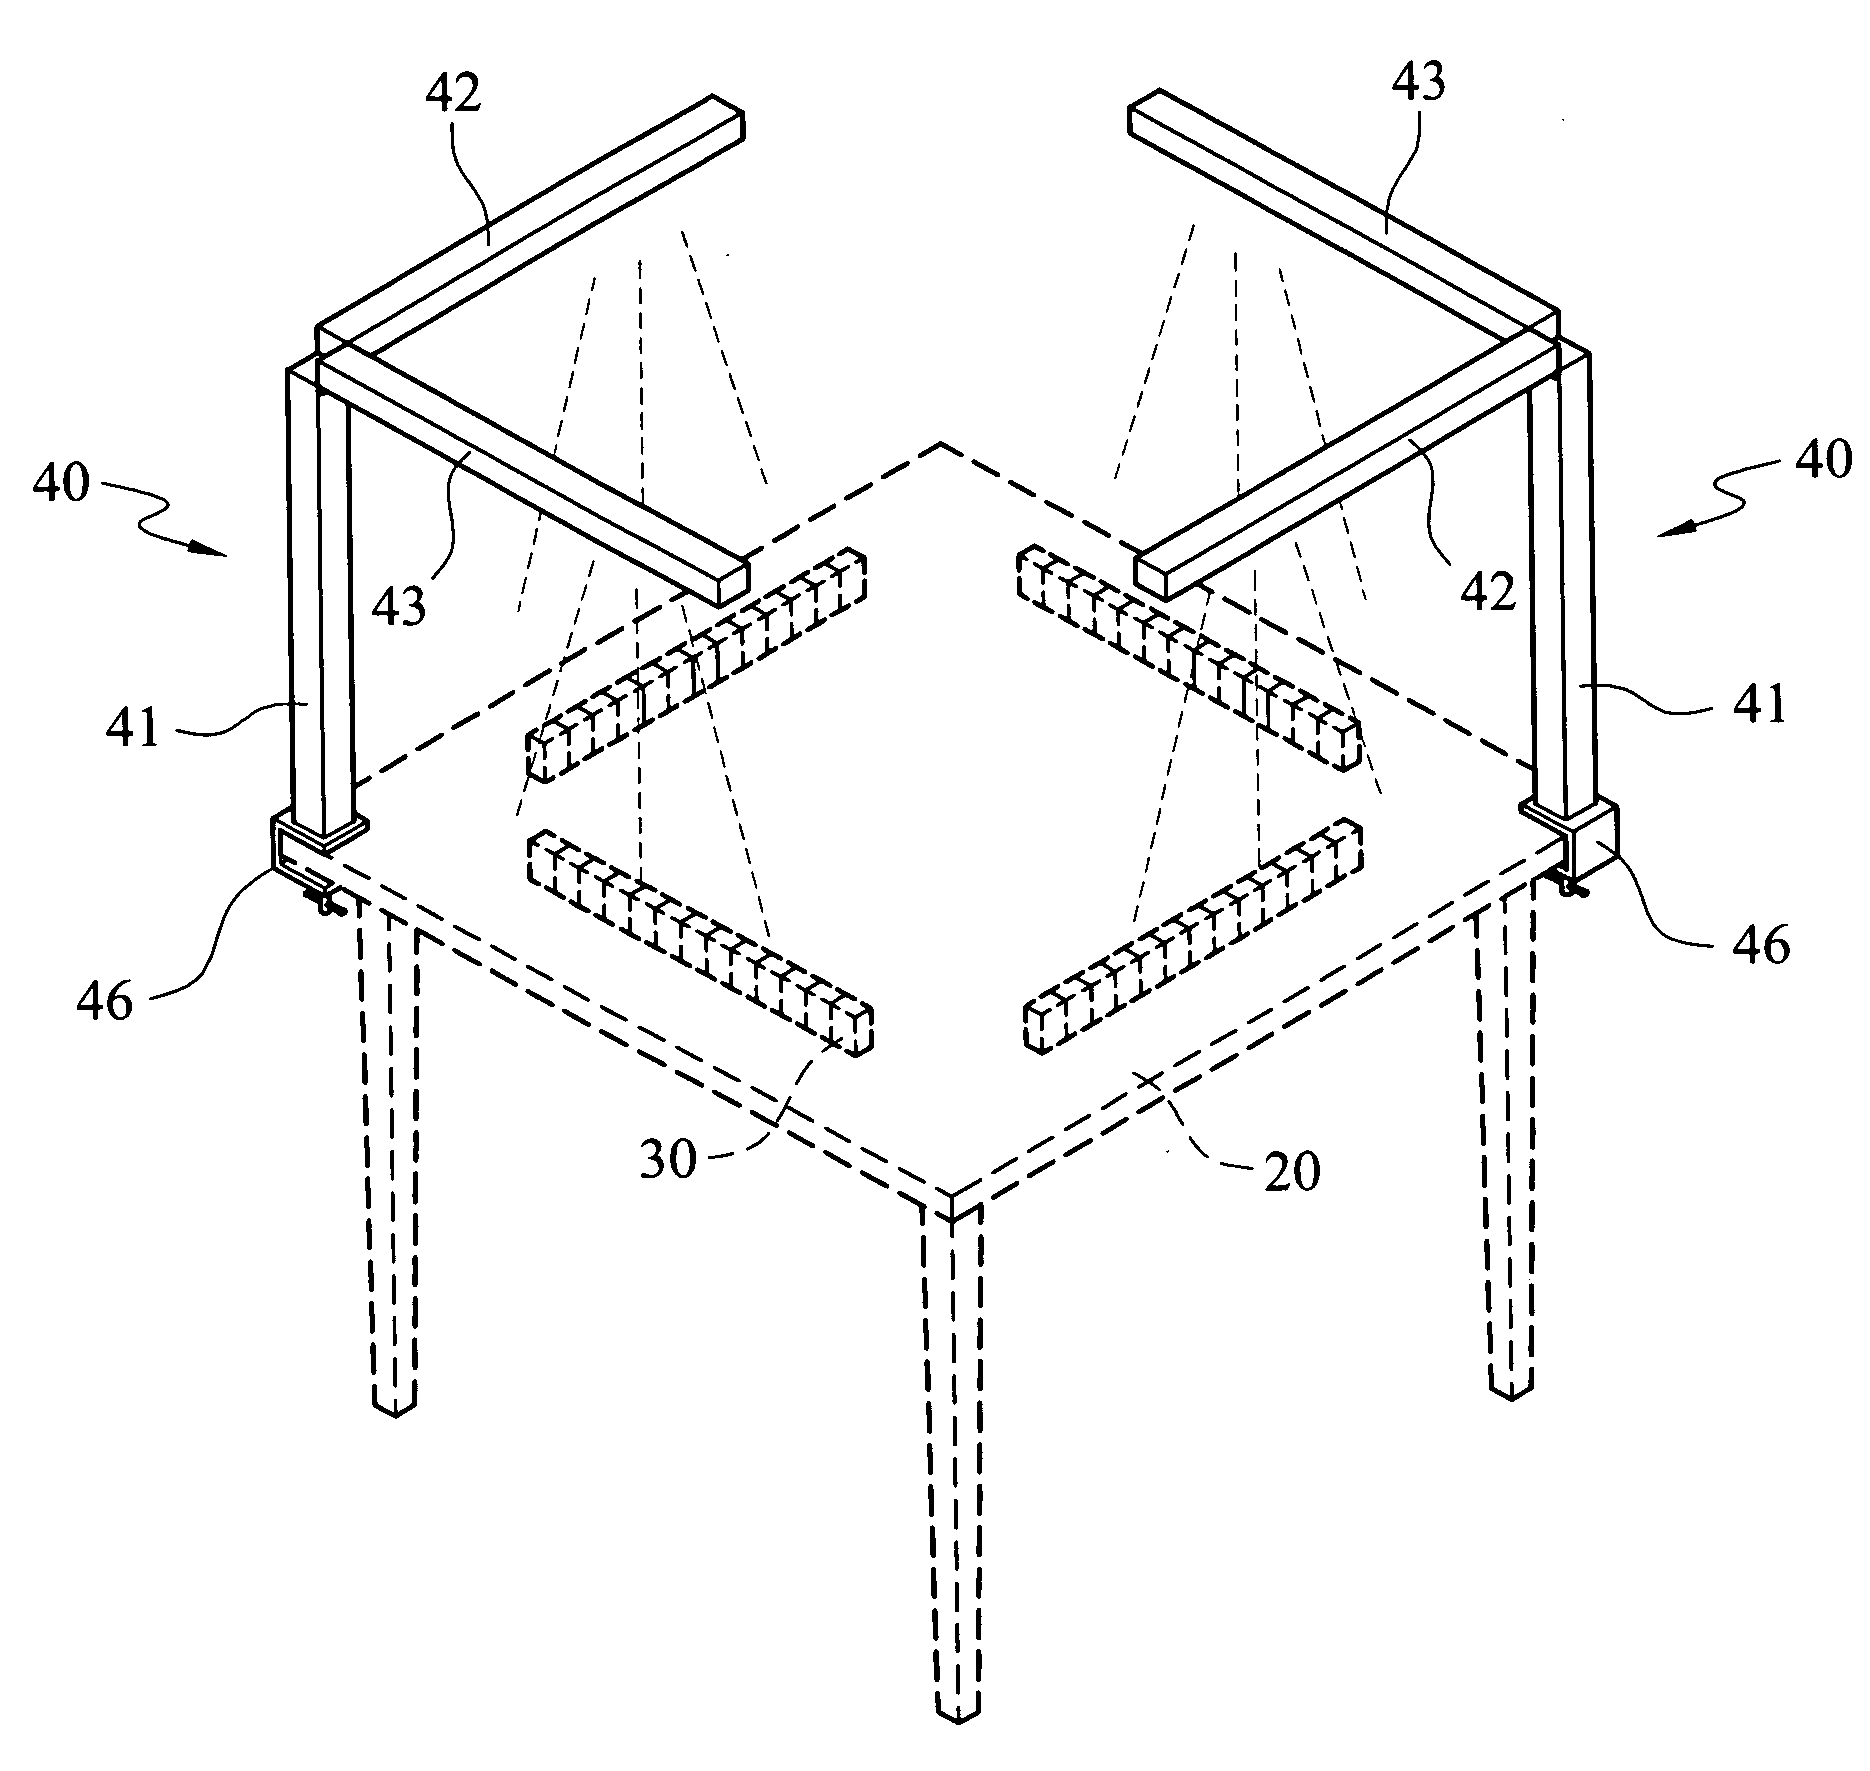 Biaxial folding lamp structure